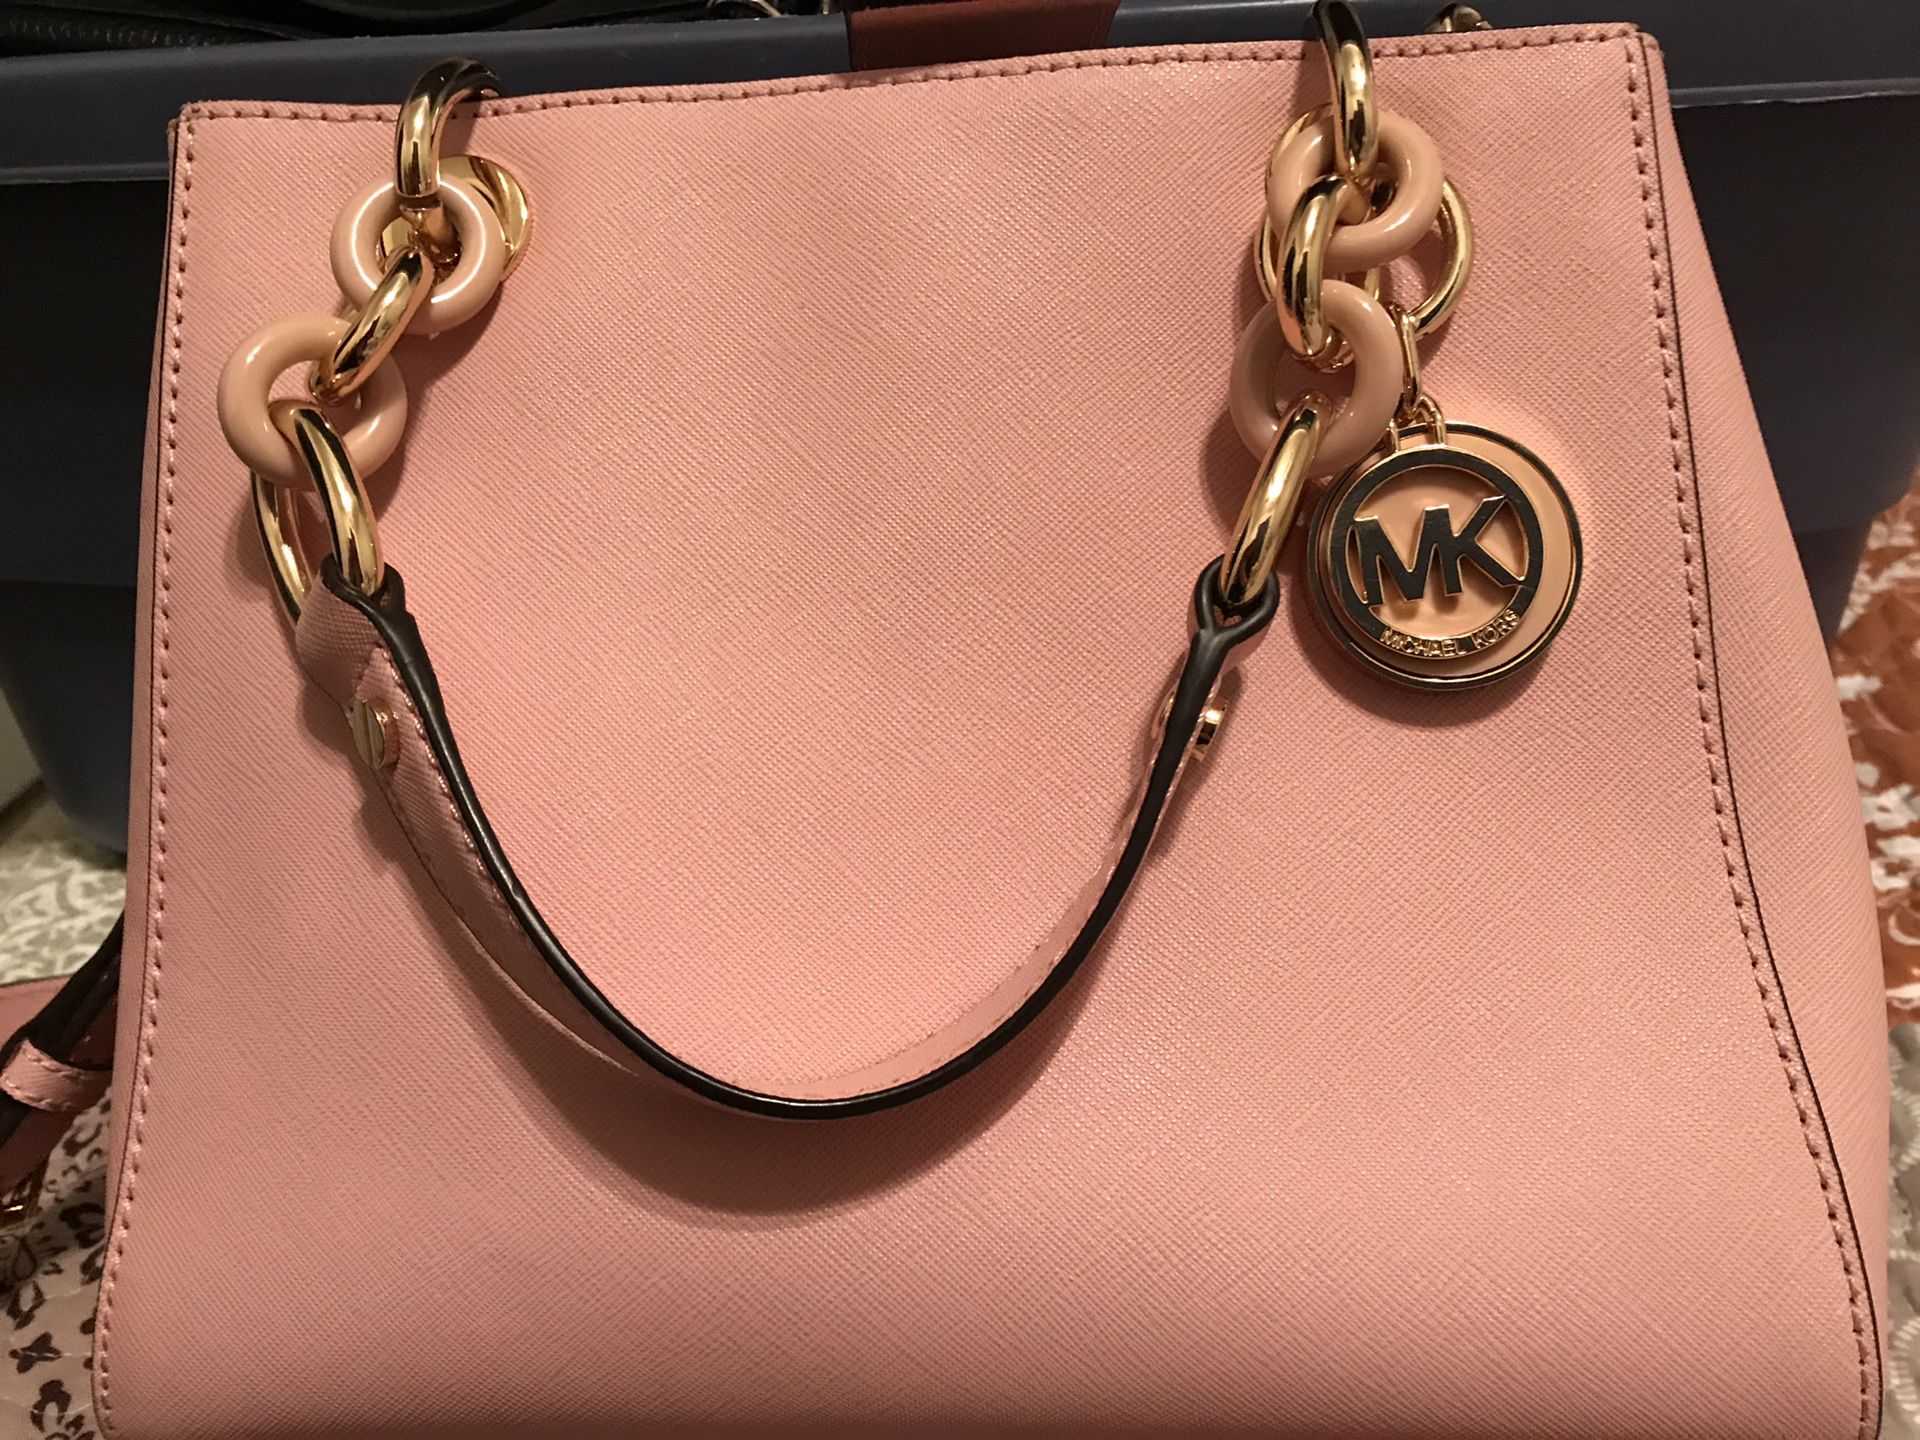 Micheal Kors purse and wallet